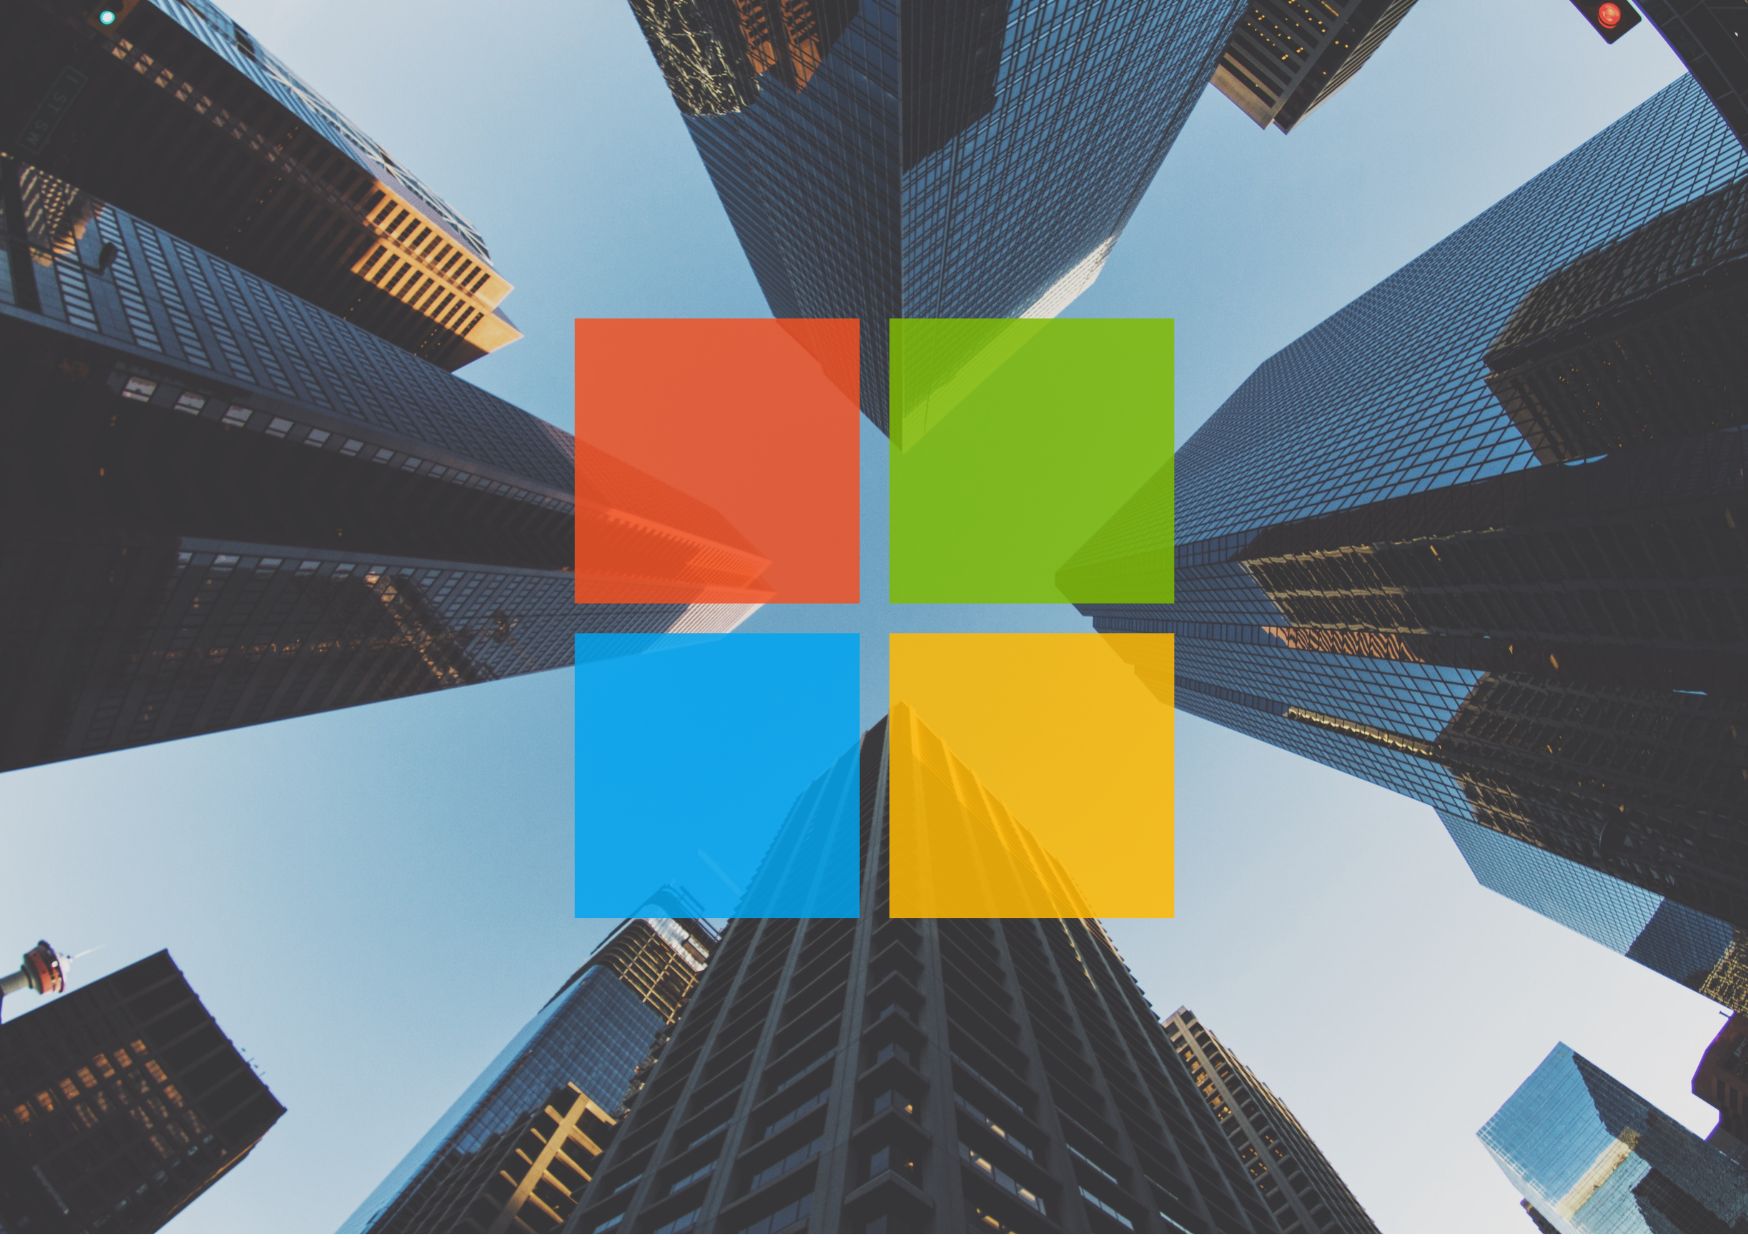 Featured image: Microsoft logo overlaid on city high rise buildings. - Read full post: How will the Microsoft licensing fee increases impact your business?